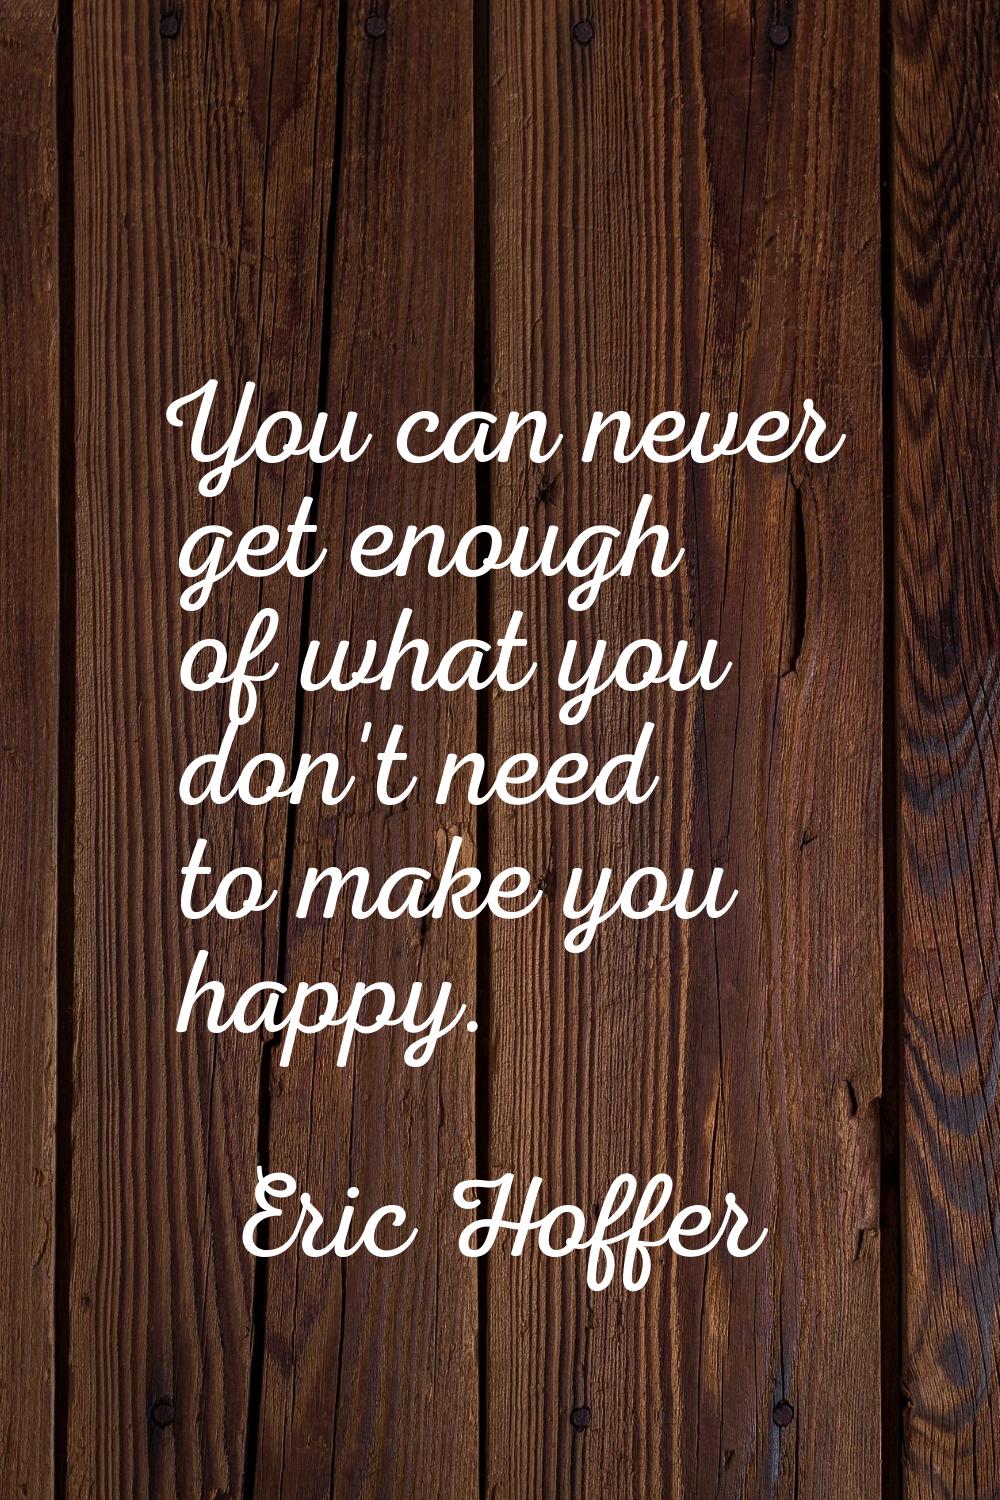 You can never get enough of what you don't need to make you happy.